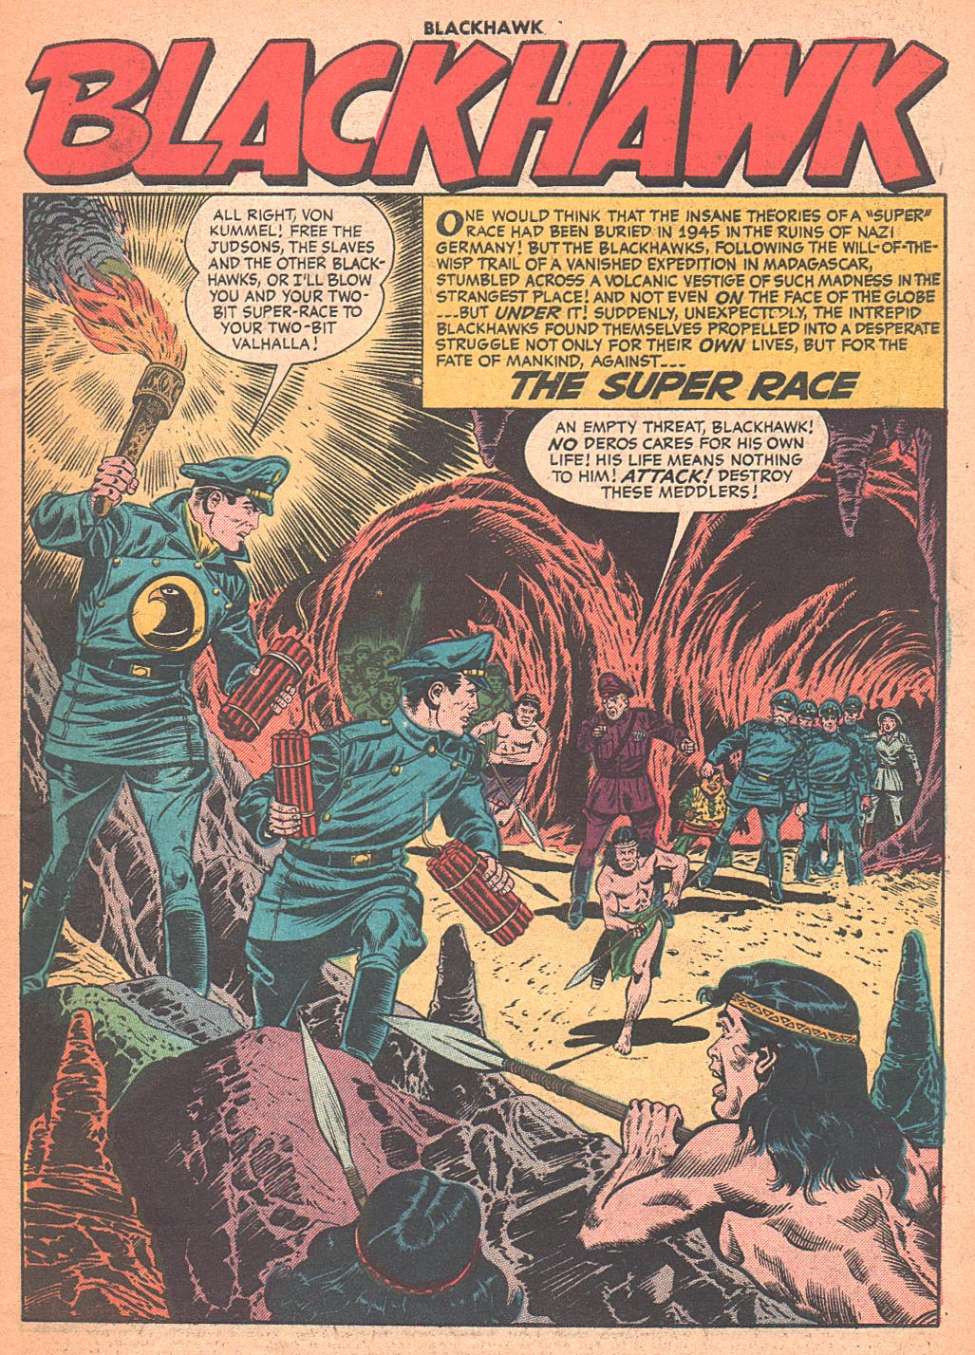 Full page panel at the beginning of "The Super Race," "Blackhawk" comics, August 1956.